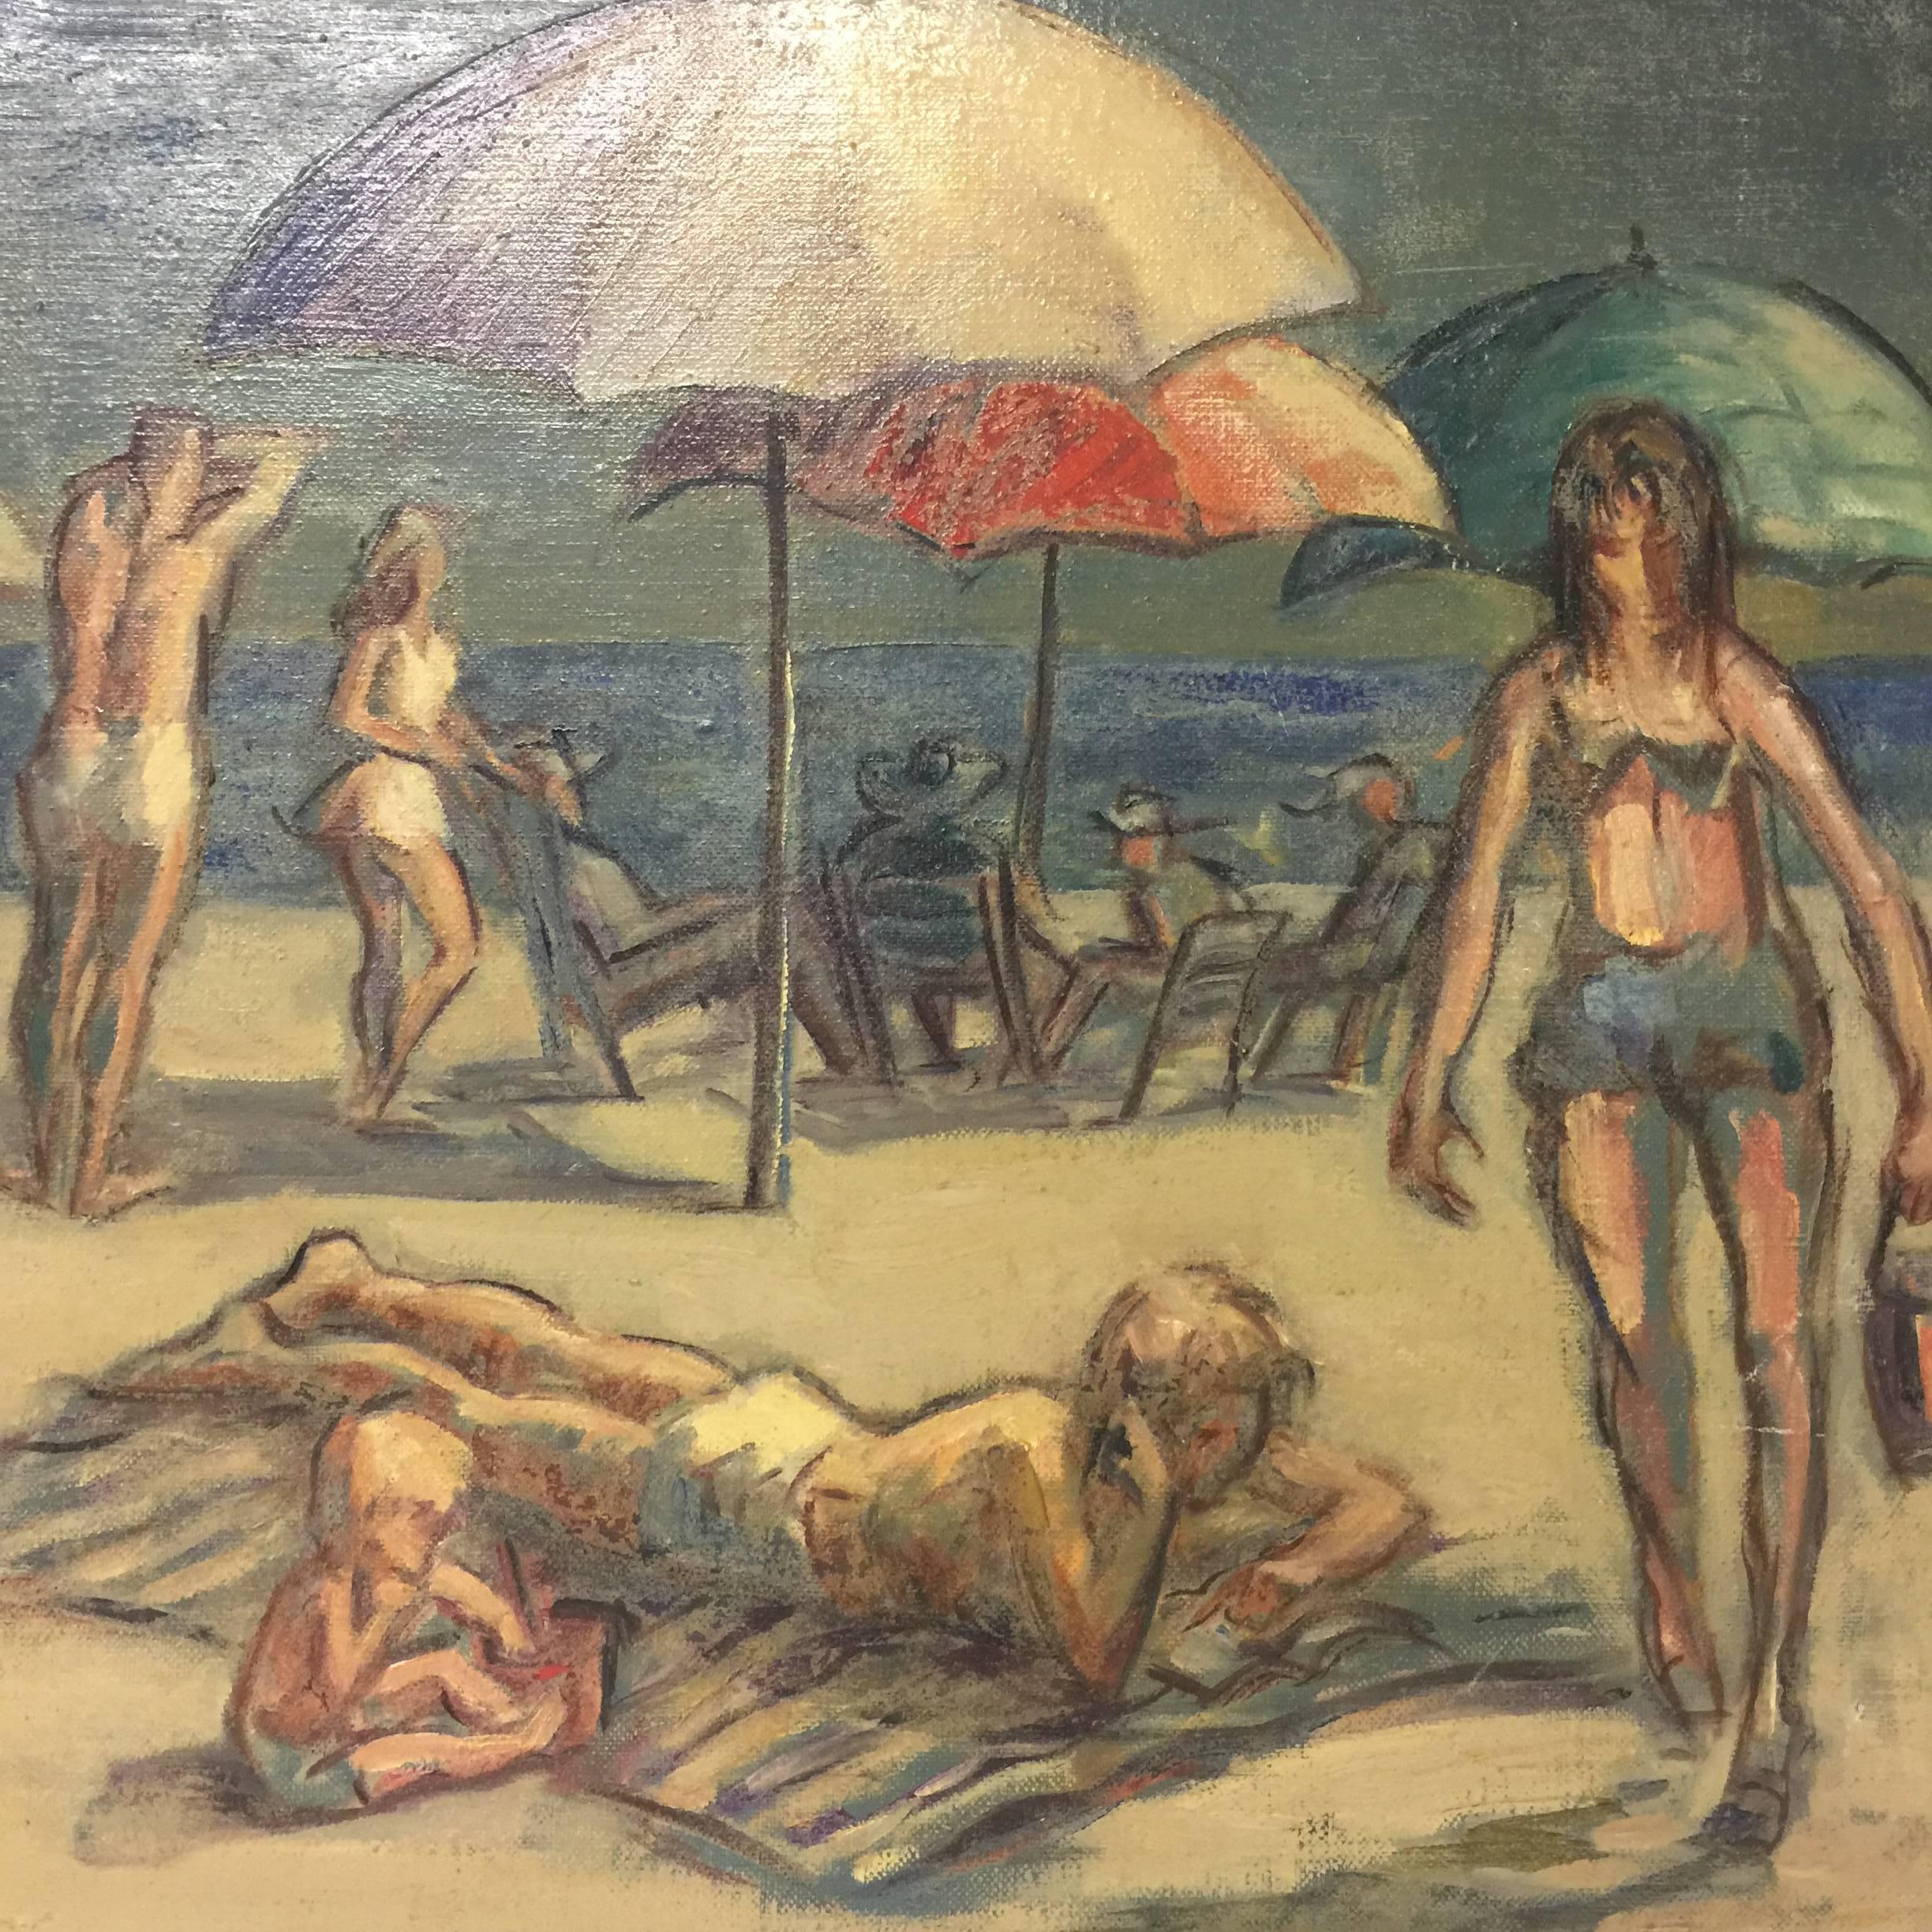 American New Jersey Beach Scene Oil on Canvas Painting Signed Imfof, Modern Period Frame